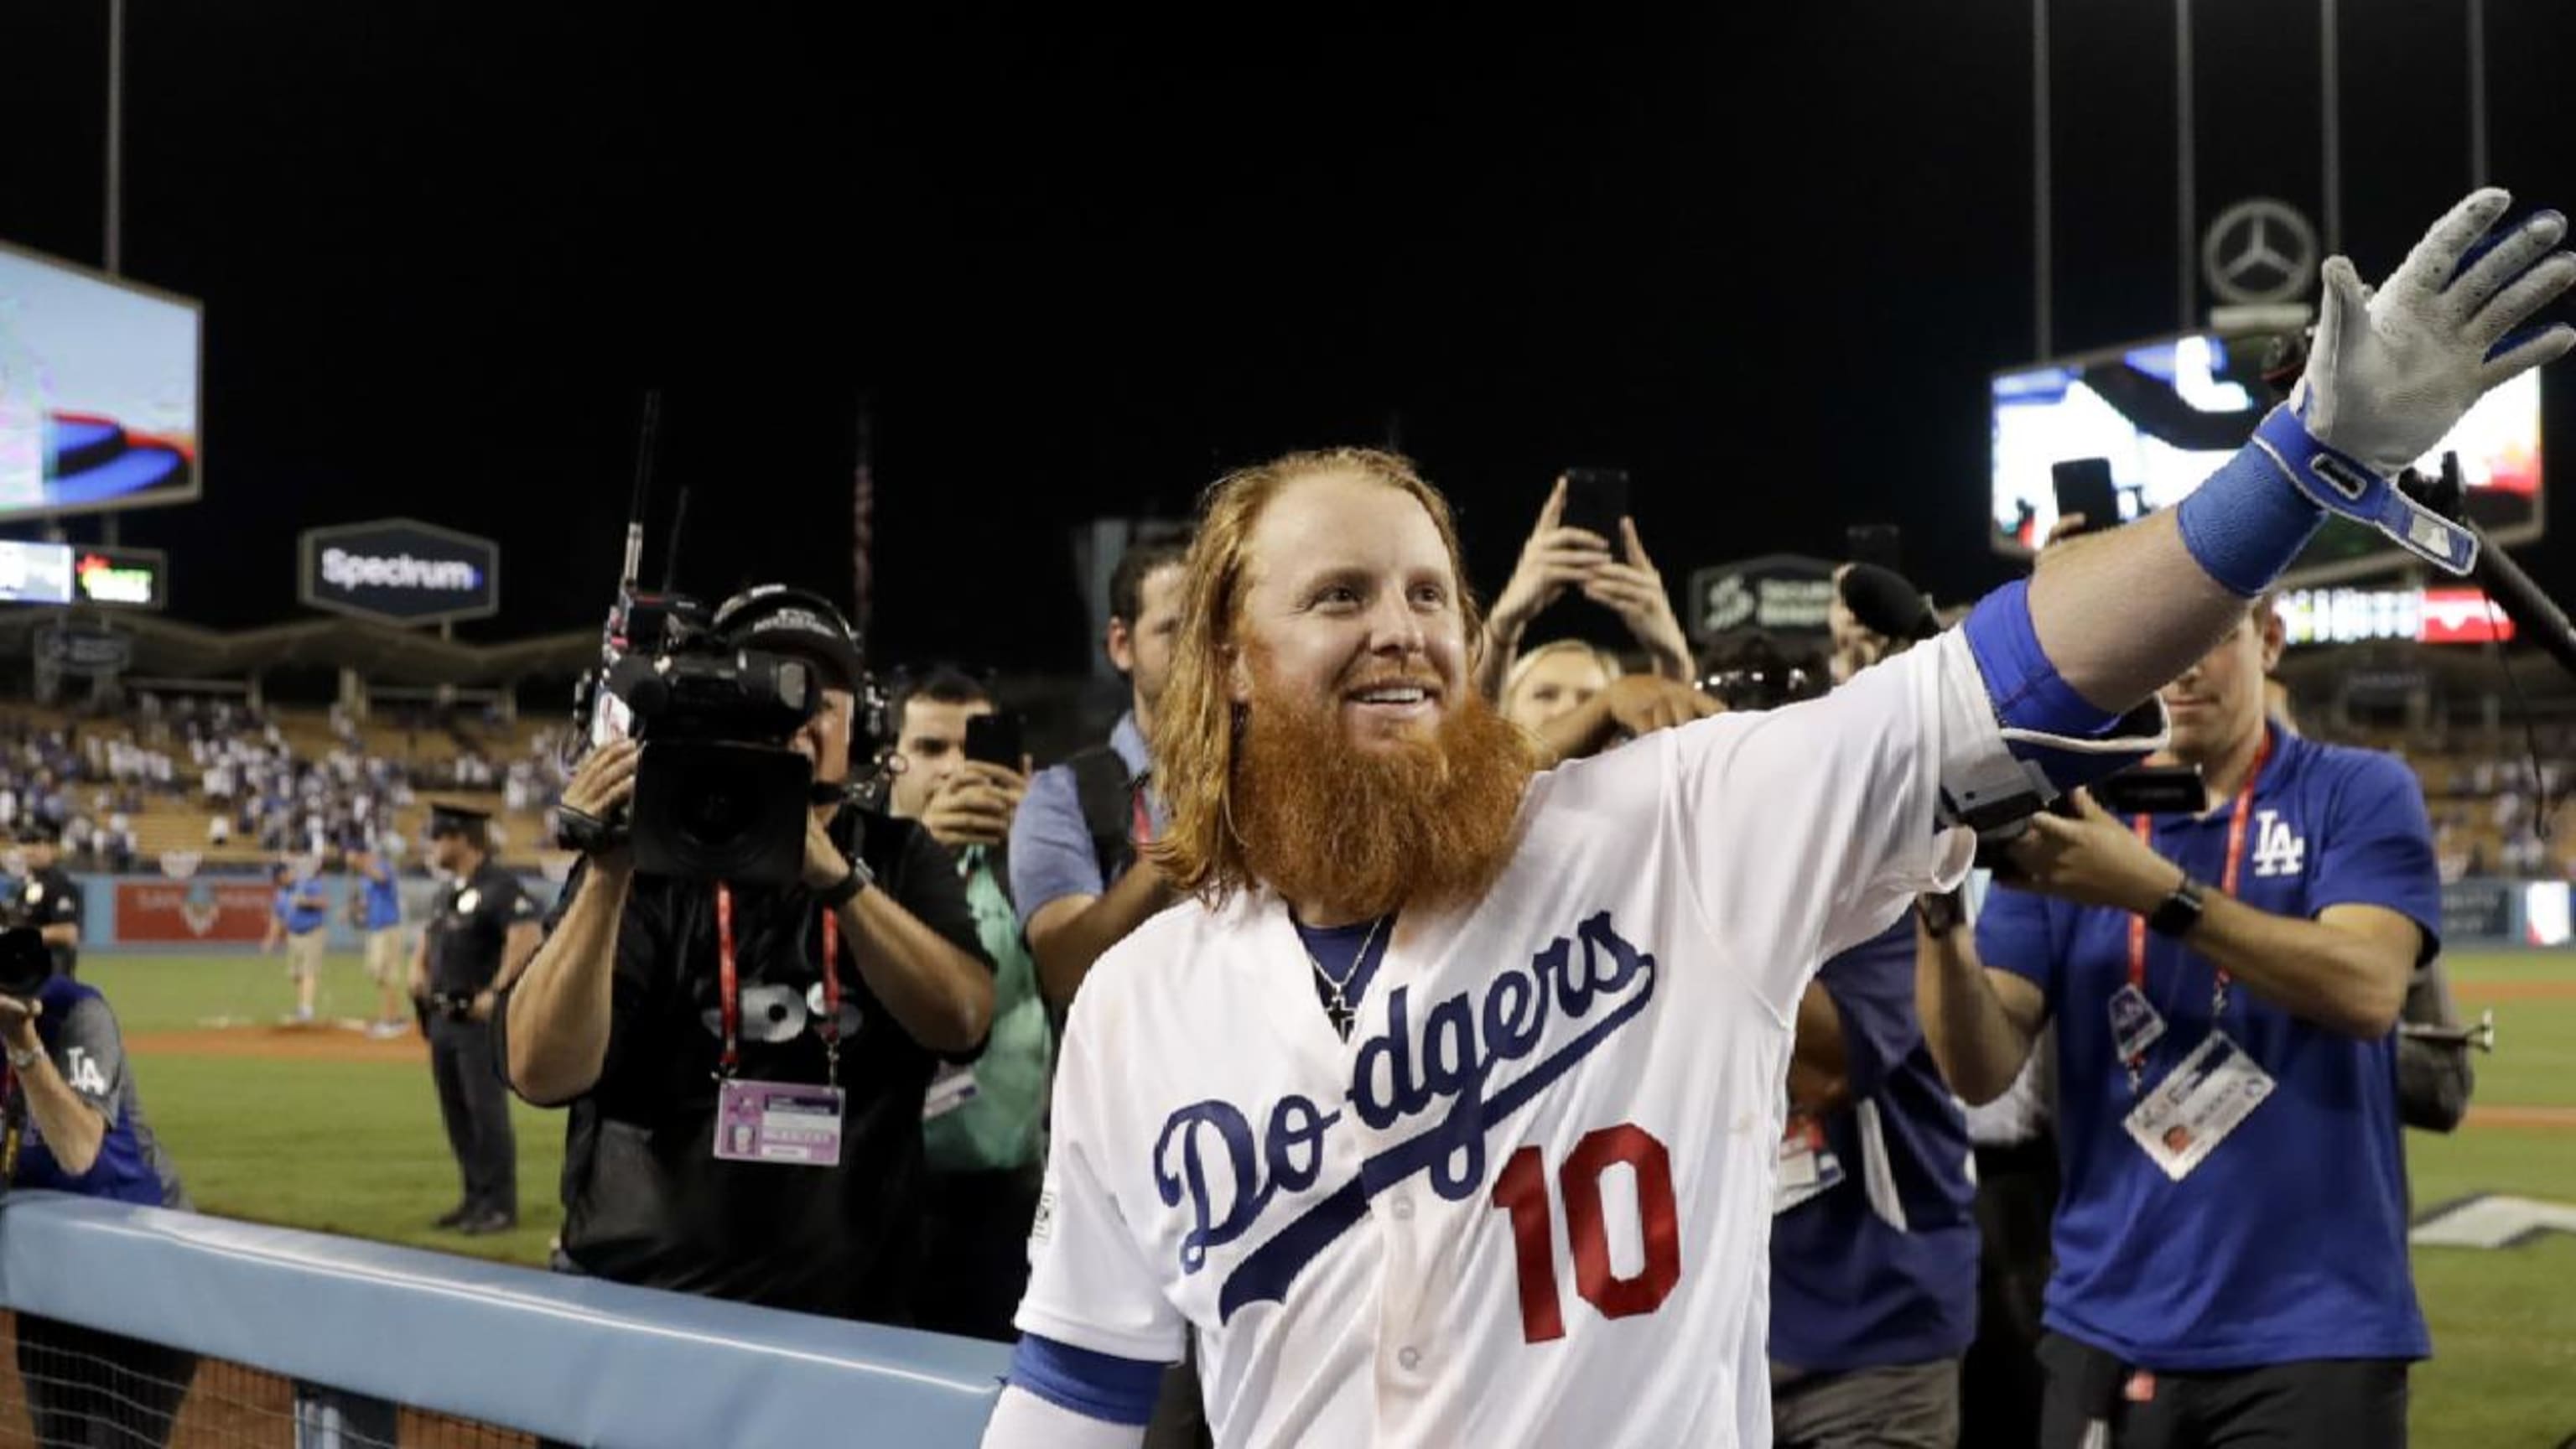 Justin Turner in Dodgers lore with walk-off HR